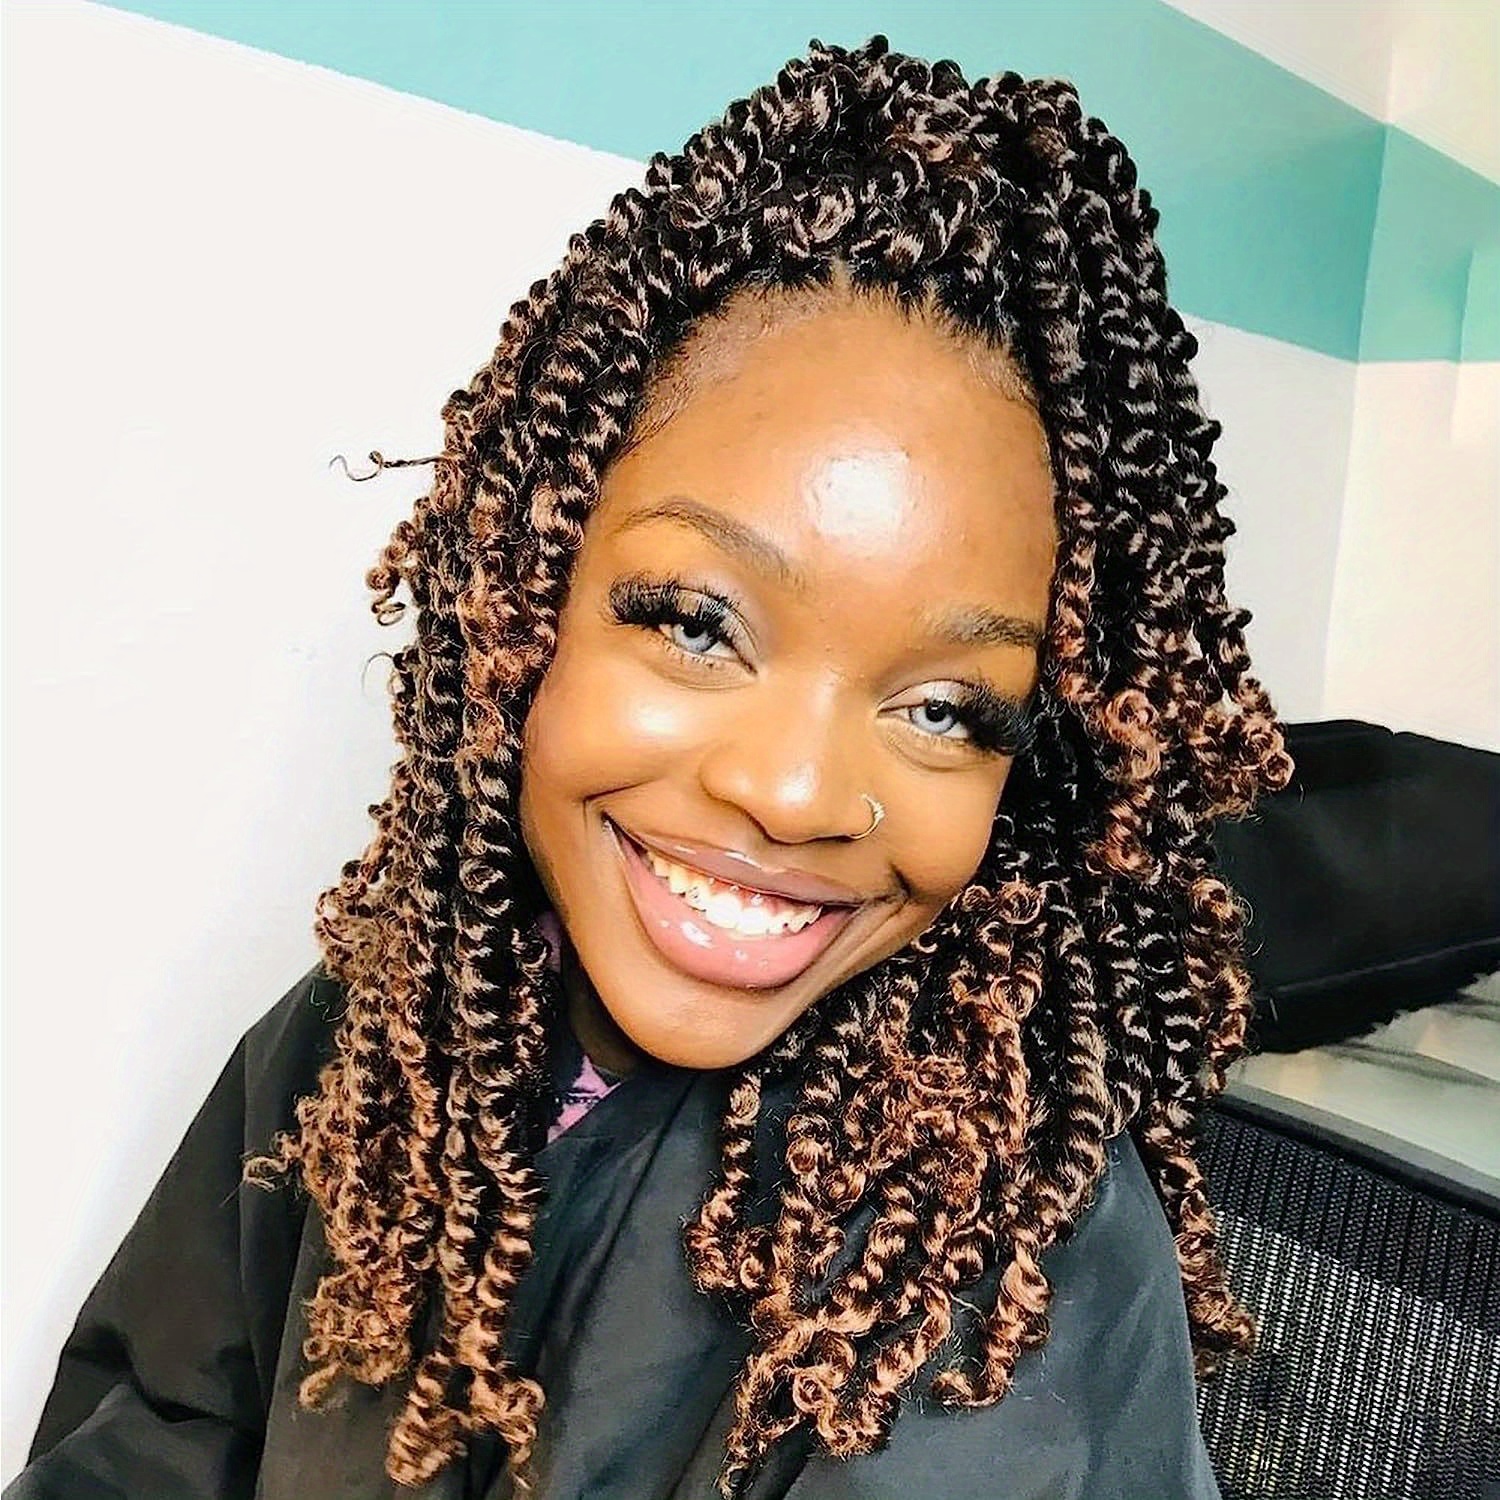  Pre-twisted Passion Twist Hair 10 Inch 8 packs Short Passion  Twist Crochet Hair Pre-looped Crochet Braids for Women Kids Gray Passion  Twists Synthetic Curly Crochet Hair Extensions 1B/Gray : Beauty